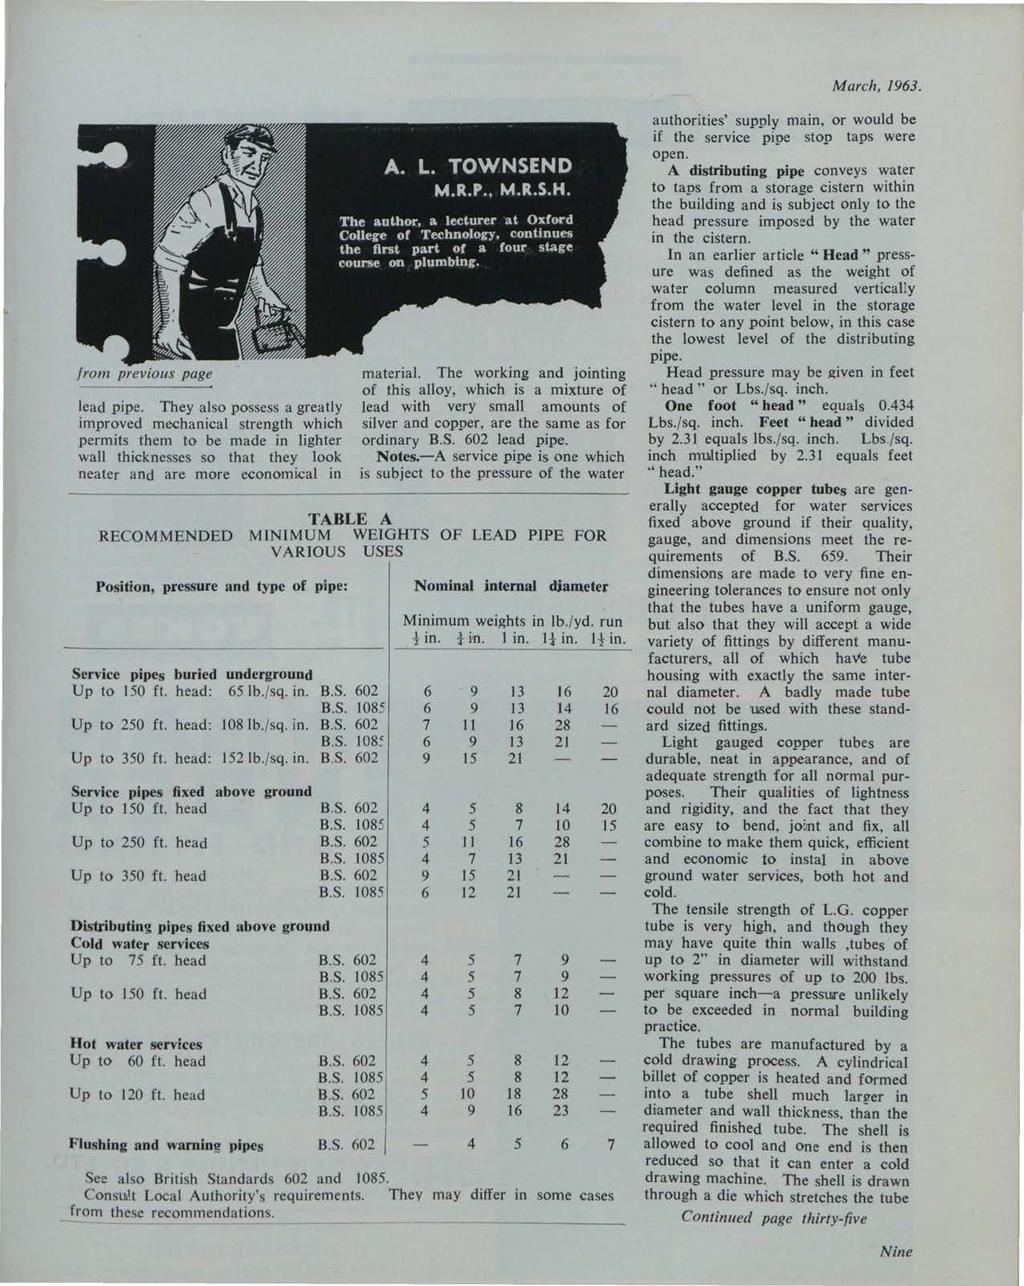 et al.: The Irish Plumber and Heating Contractor, March 1963 (complete is from previous page lead pipe.